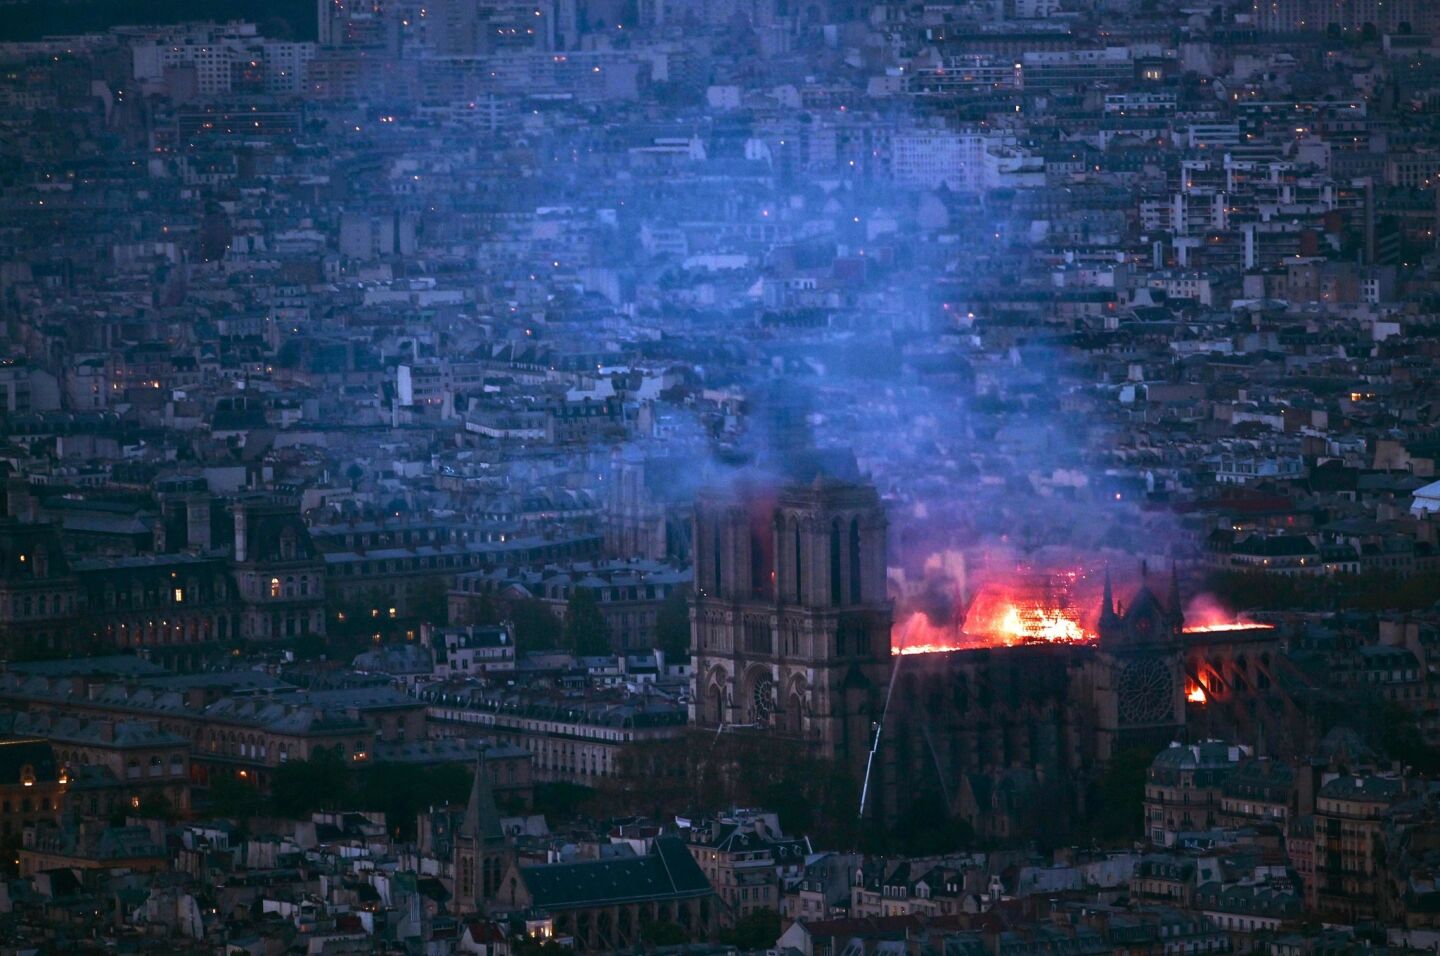 The view from Montparnasse Tower shows flames and smoke at Notre Dame. A ferocious and fast-moving blaze, which broke out about 6:45 p.m., destroyed large parts of the 850-year-old Gothic monument in Paris.